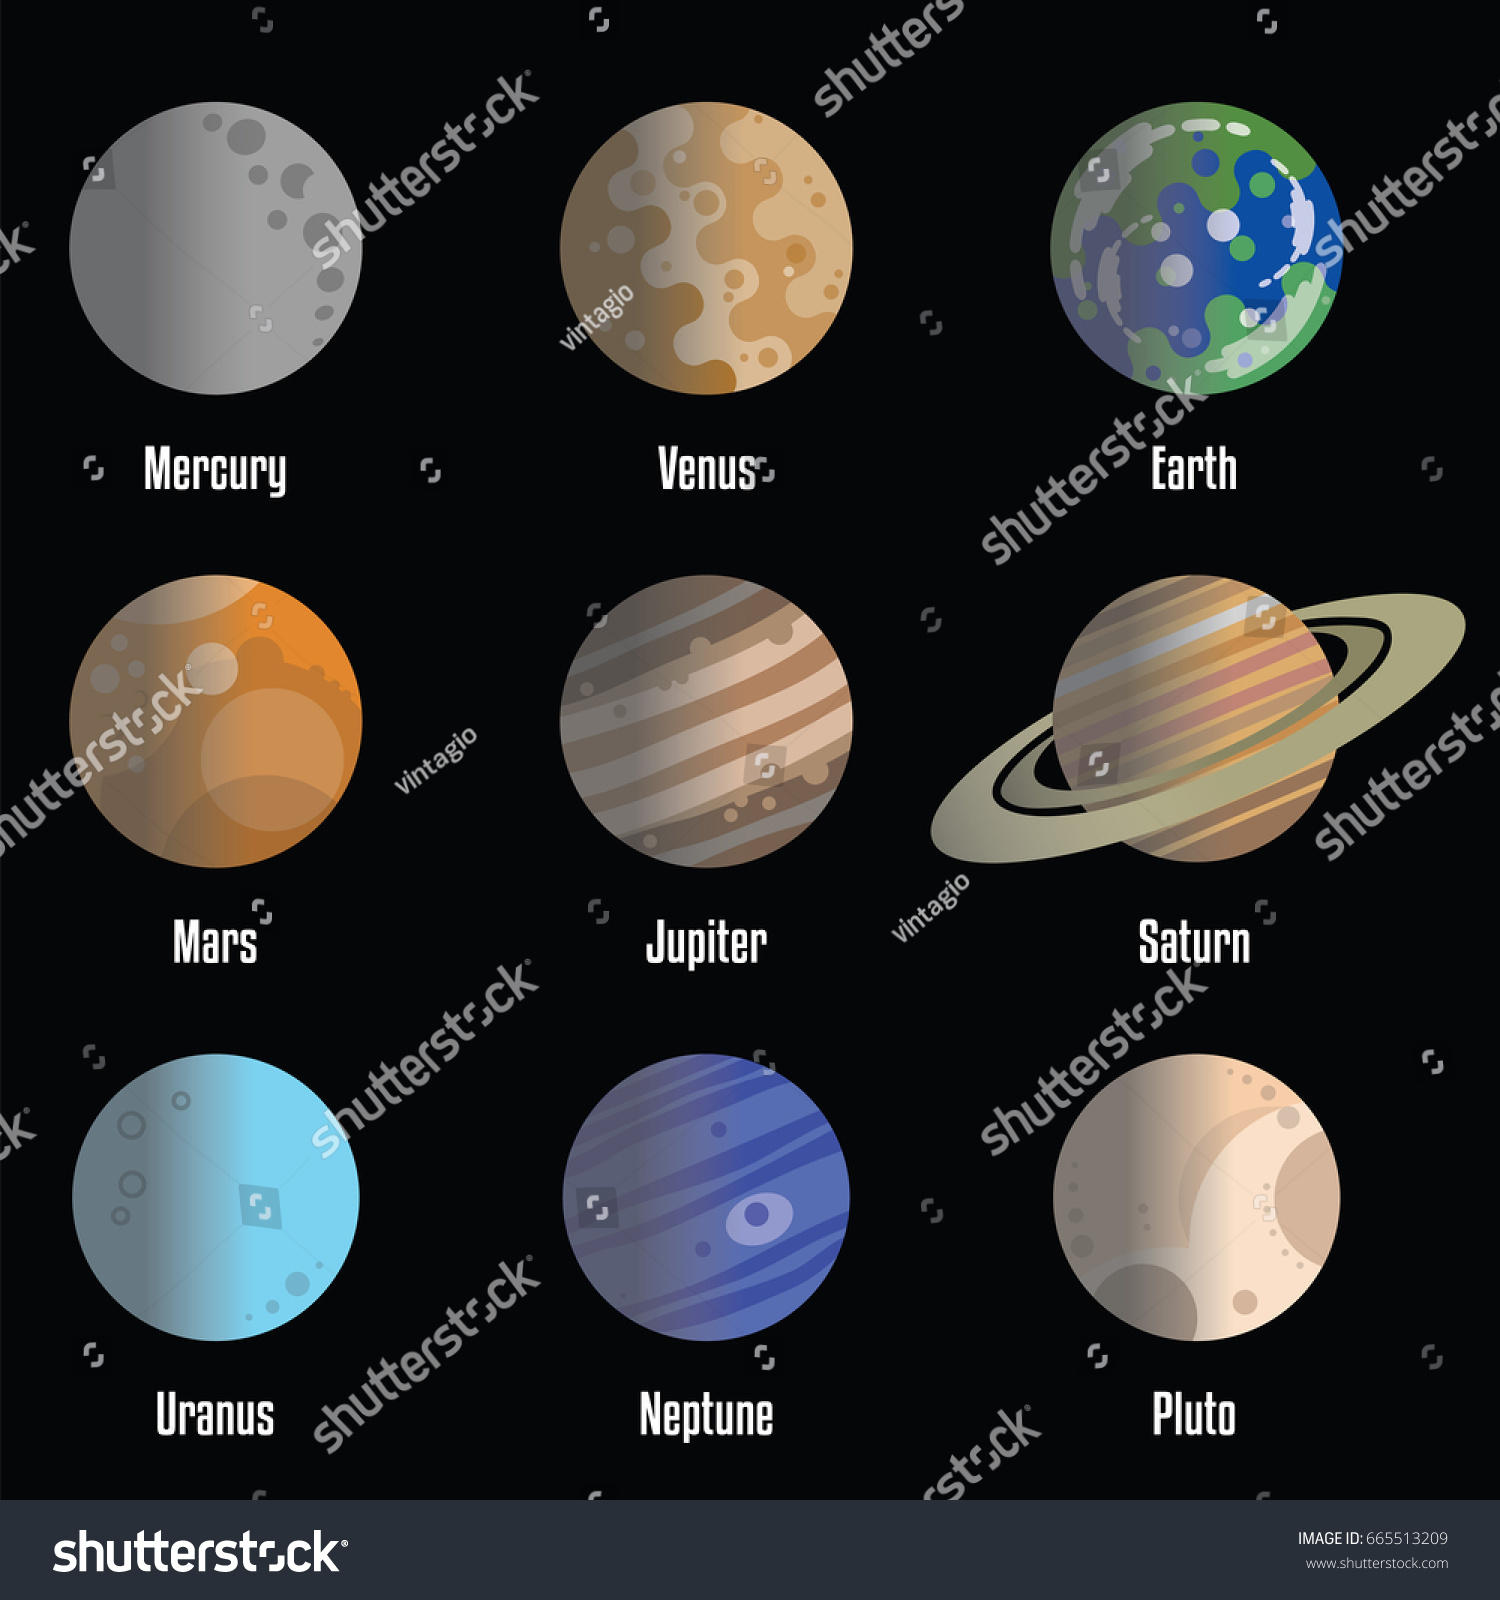 Image de Systeme solaire: Planet Solar System Images With Names